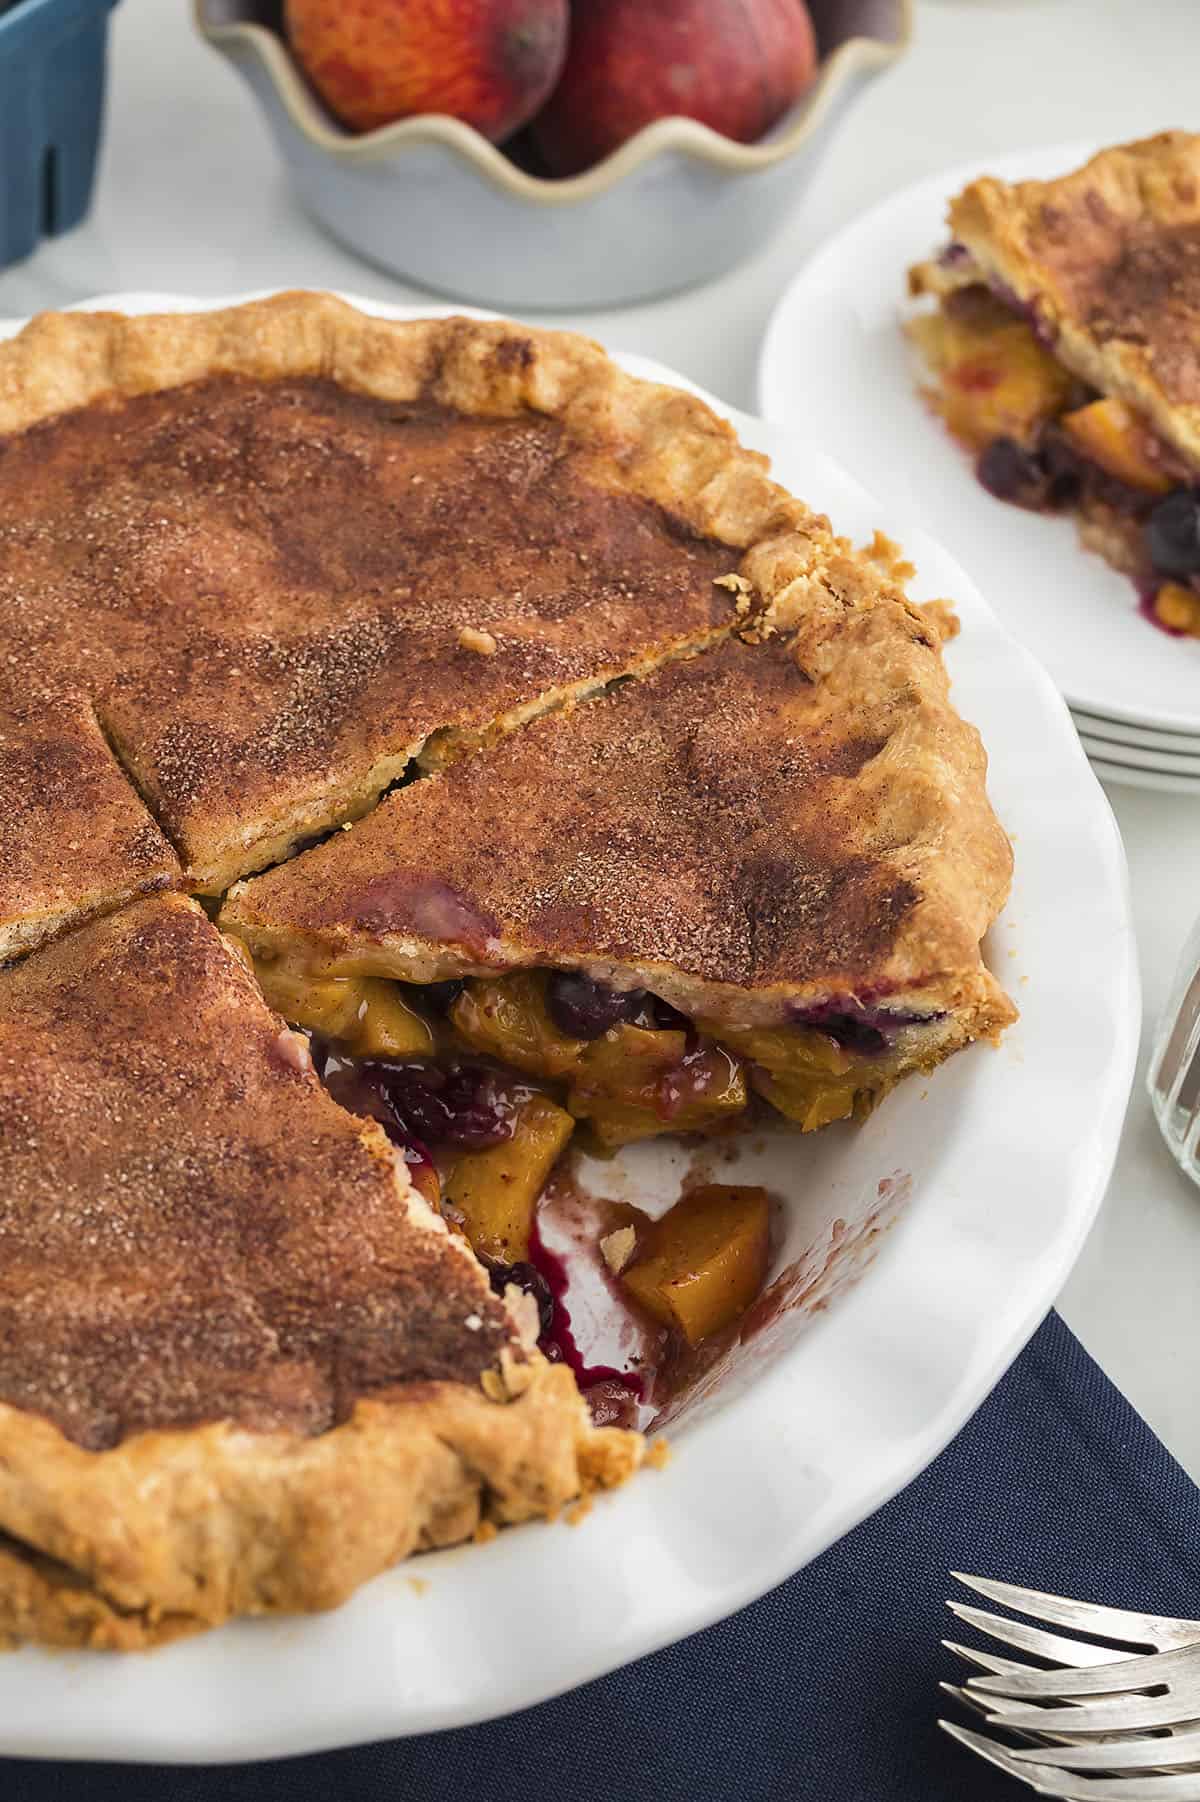 Blueberry peach pie with cinnamon sugar topping on crust.